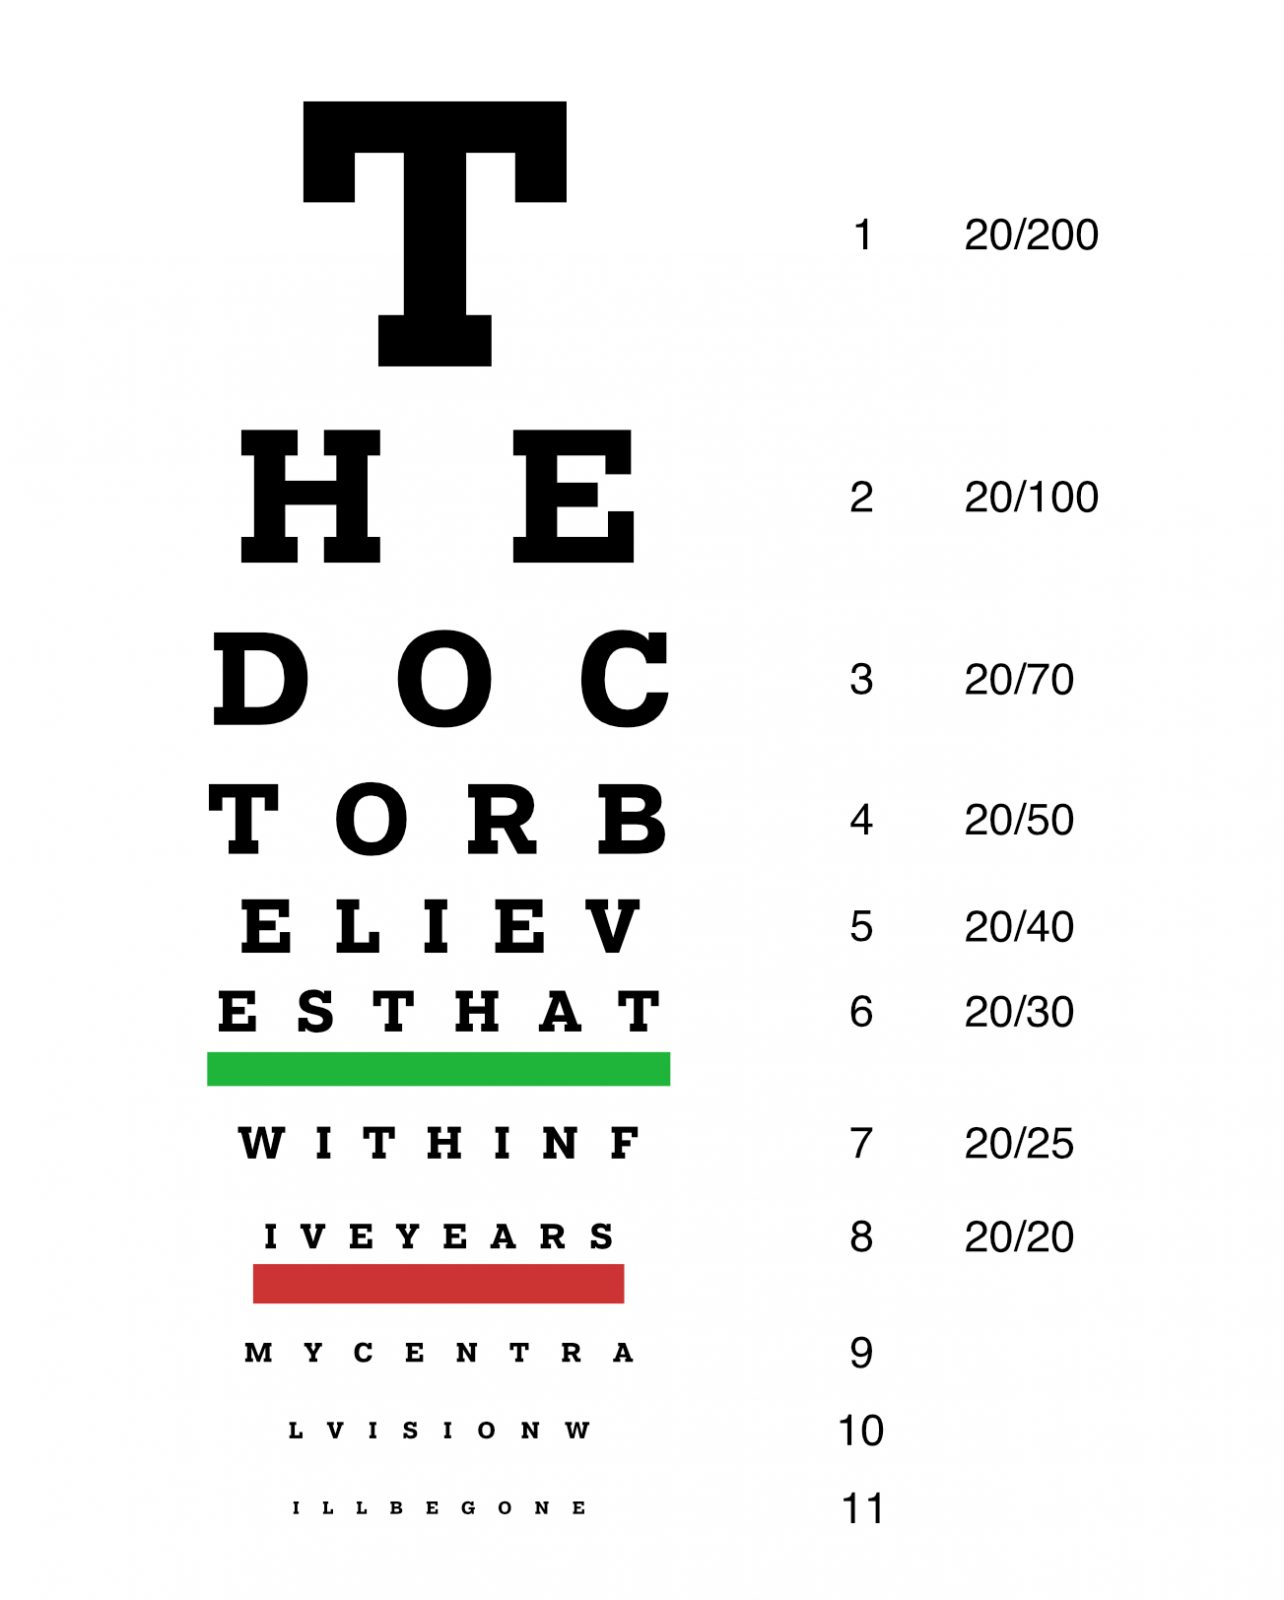 the doctor believes that within five years my central vision will be gone